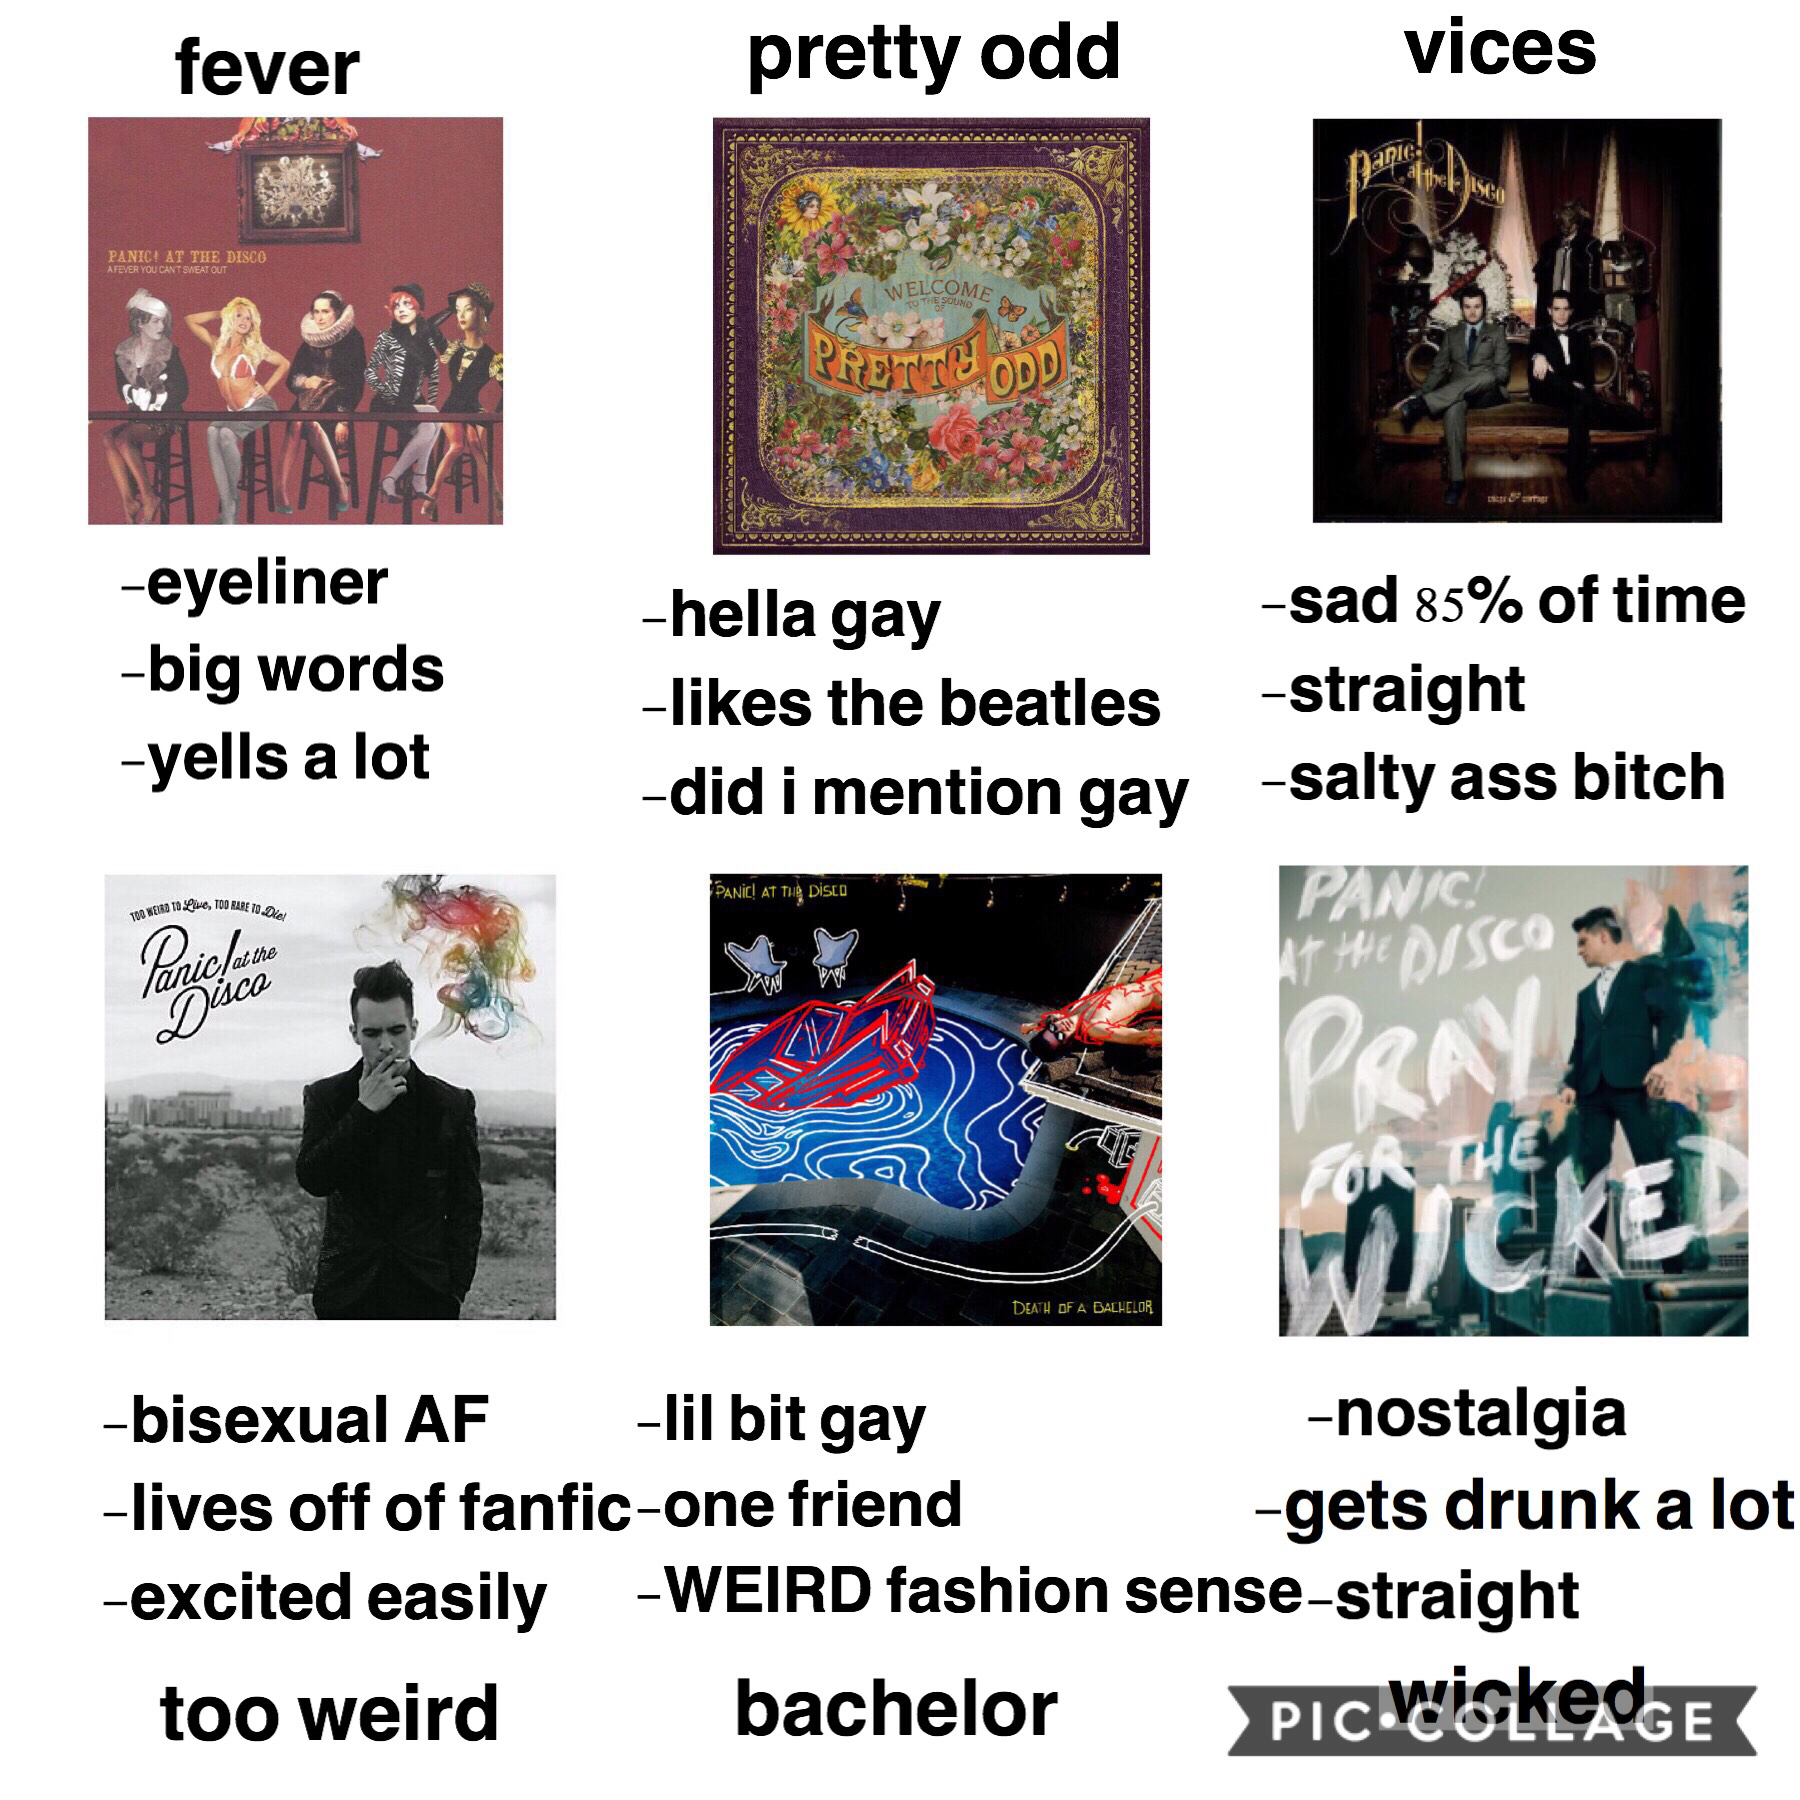 TAP
TAG YOURSELF
i’m totally Pretty Odd tho ;’)
i must say, i’m highly inspired by this meme